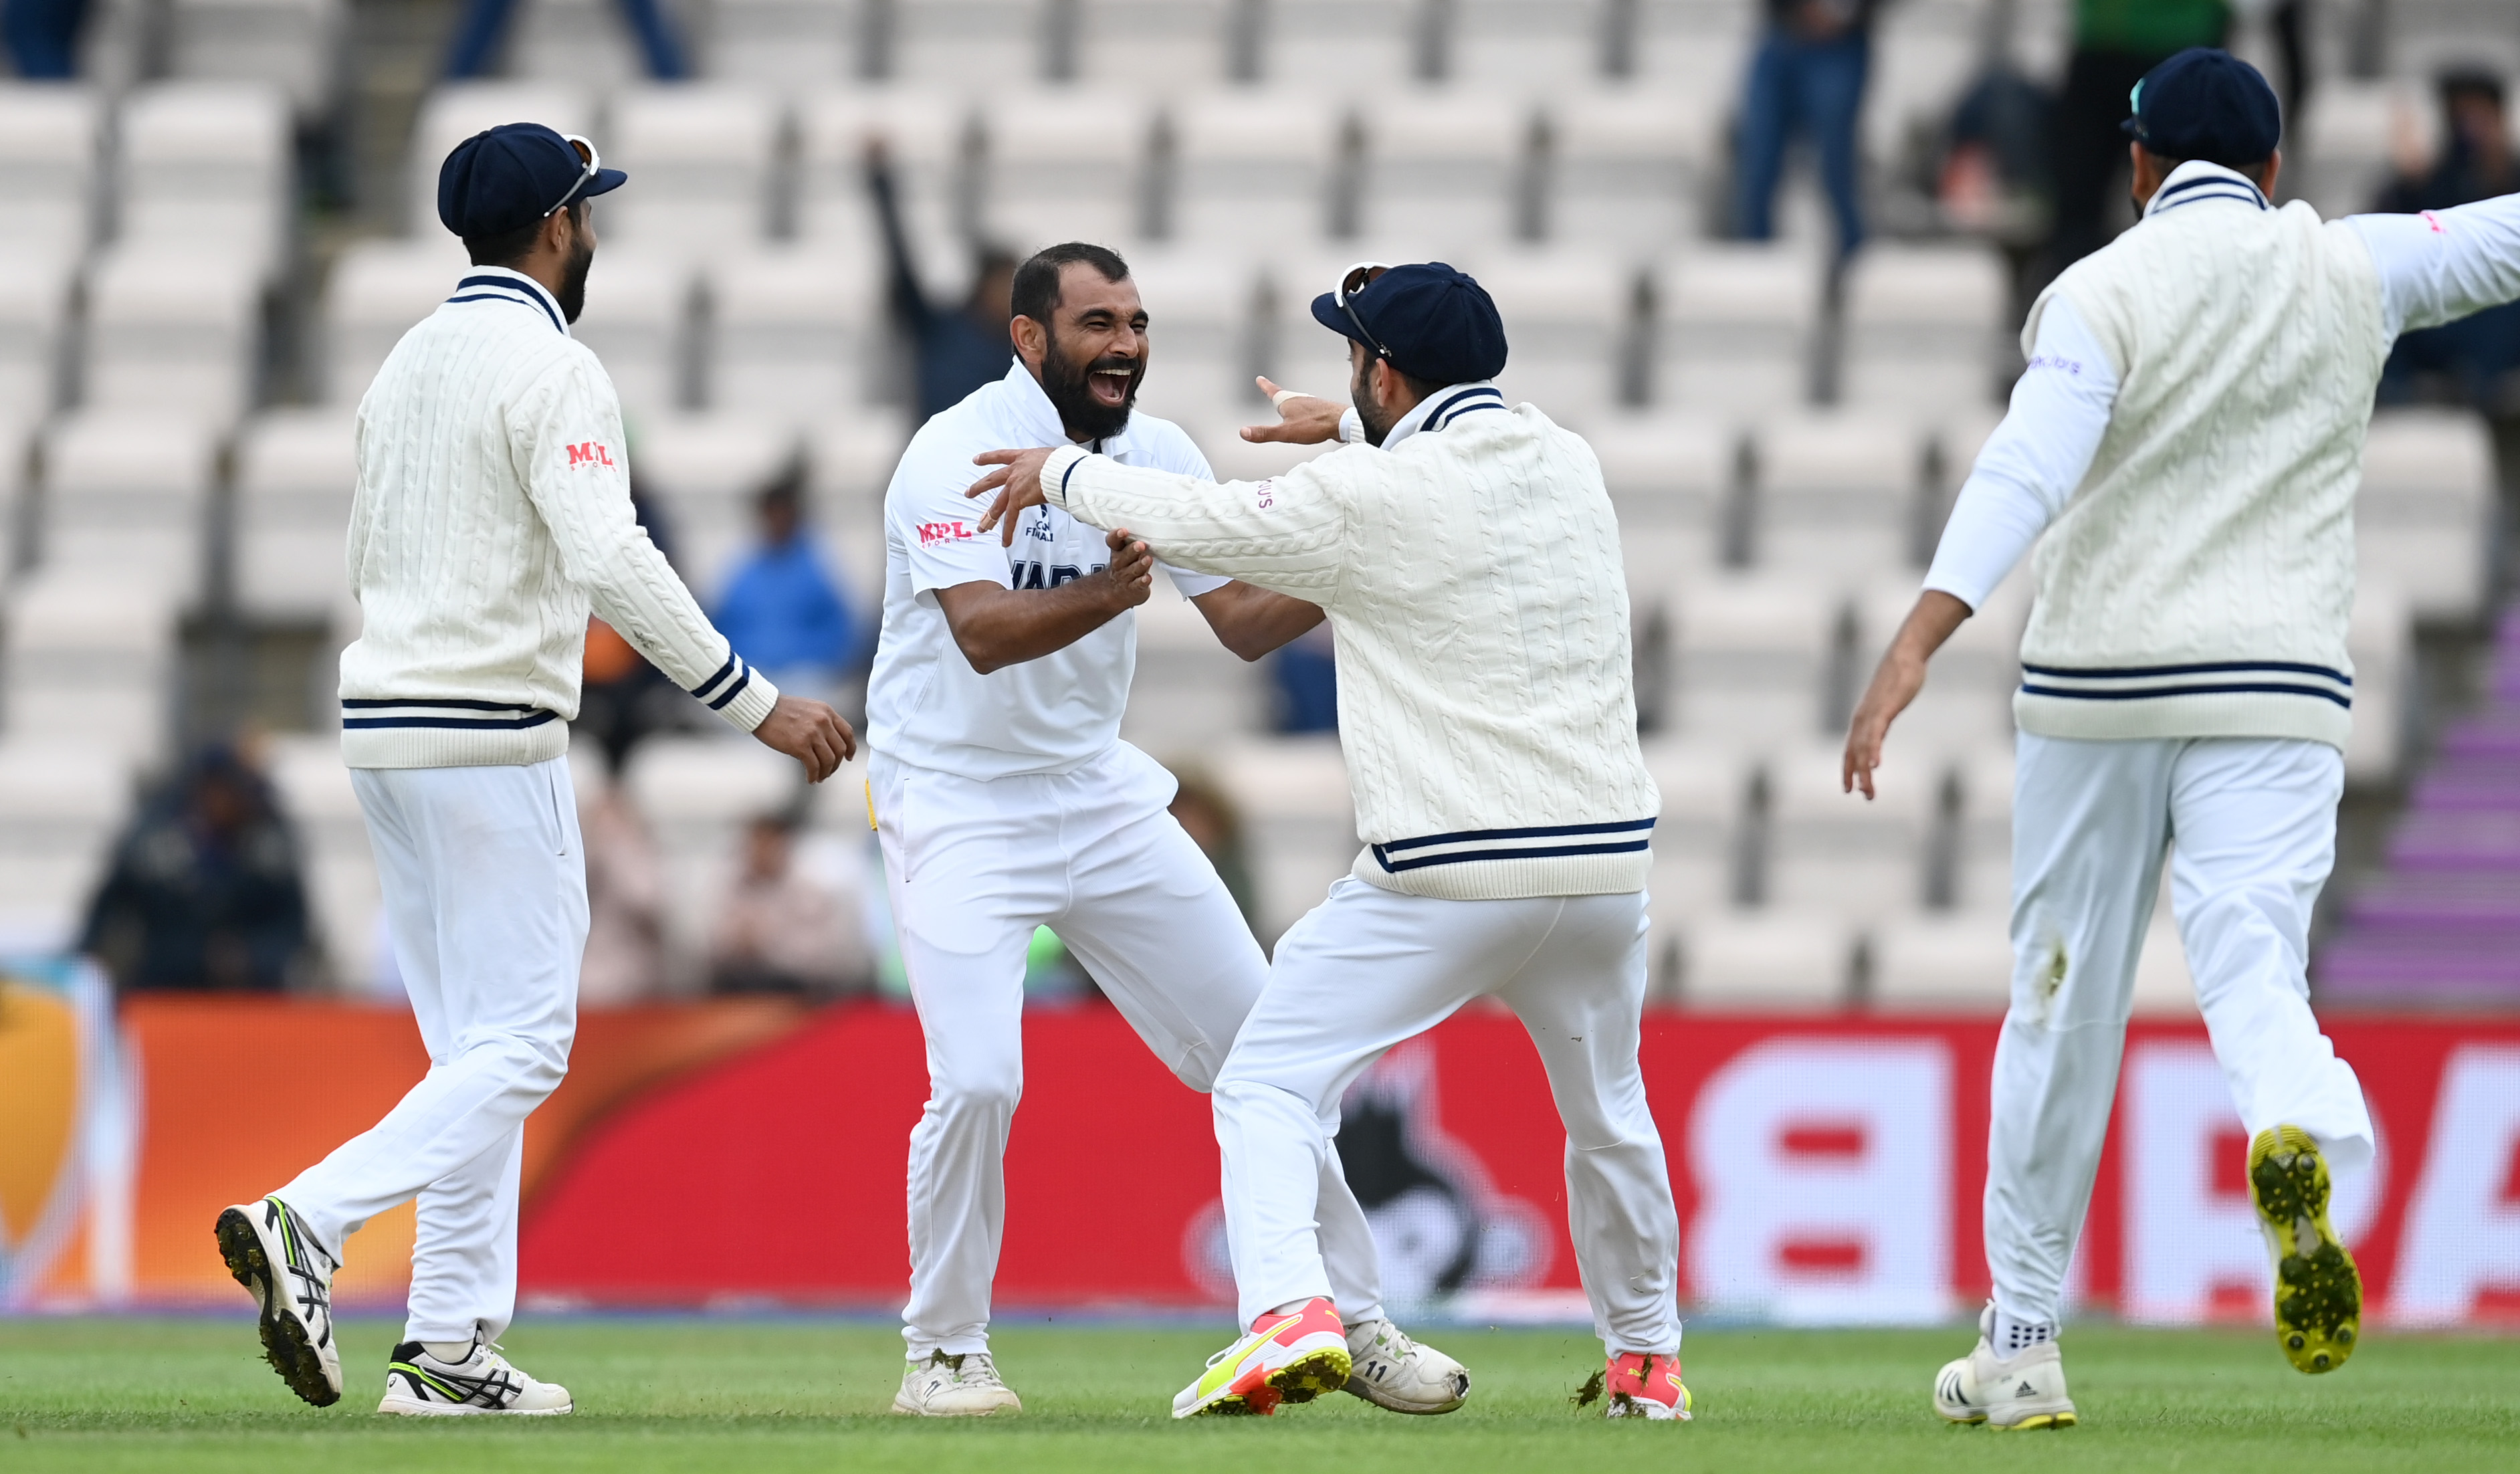 WTC Final | Rose Bowl Day 5 Talking Points: ‘Unlucky’ Shami turns MVP and Williamson’s unfamiliar innings